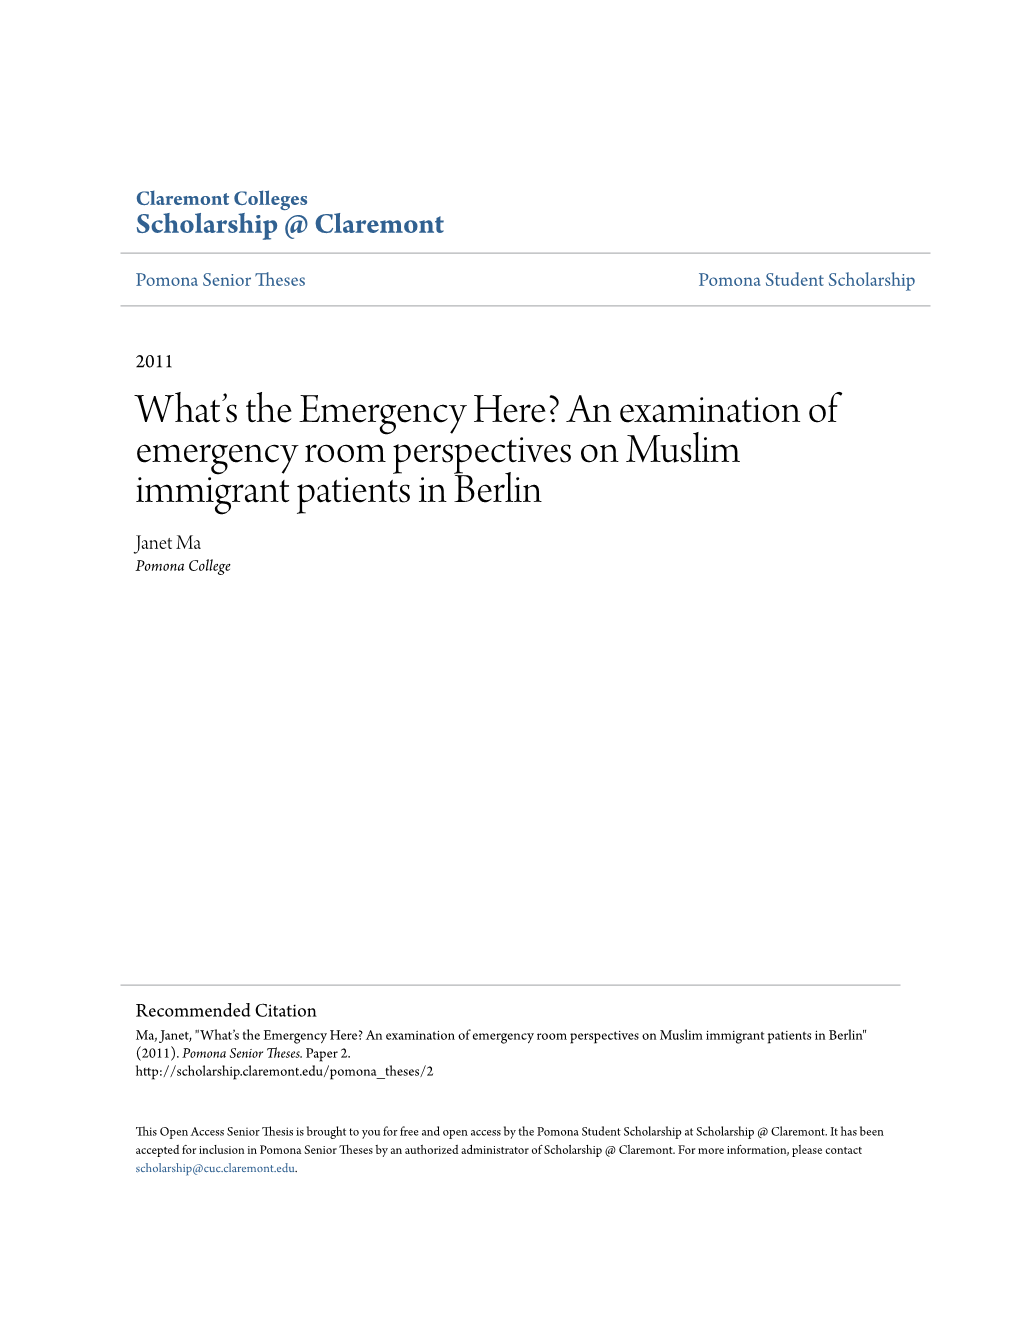 An Examination of Emergency Room Perspectives on Muslim Immigrant Patients in Berlin Janet Ma Pomona College